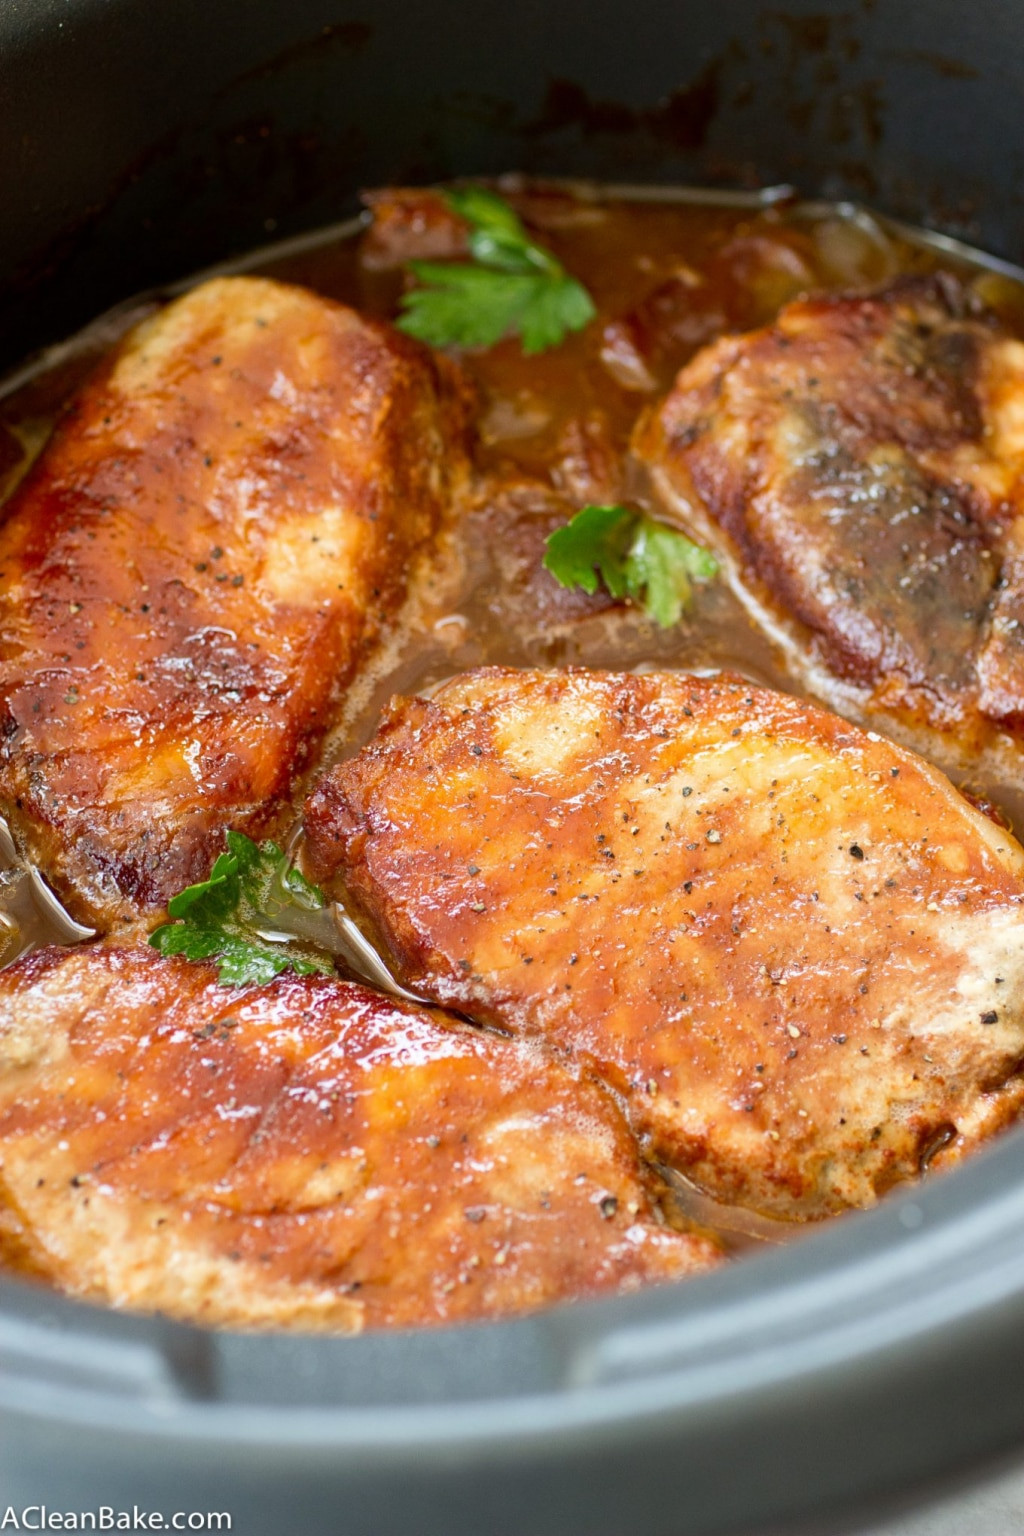 Healthy Pork Chop Slow Cooker Recipes the 20 Best Ideas for Crockpot Pork Chops with Apples and Ions